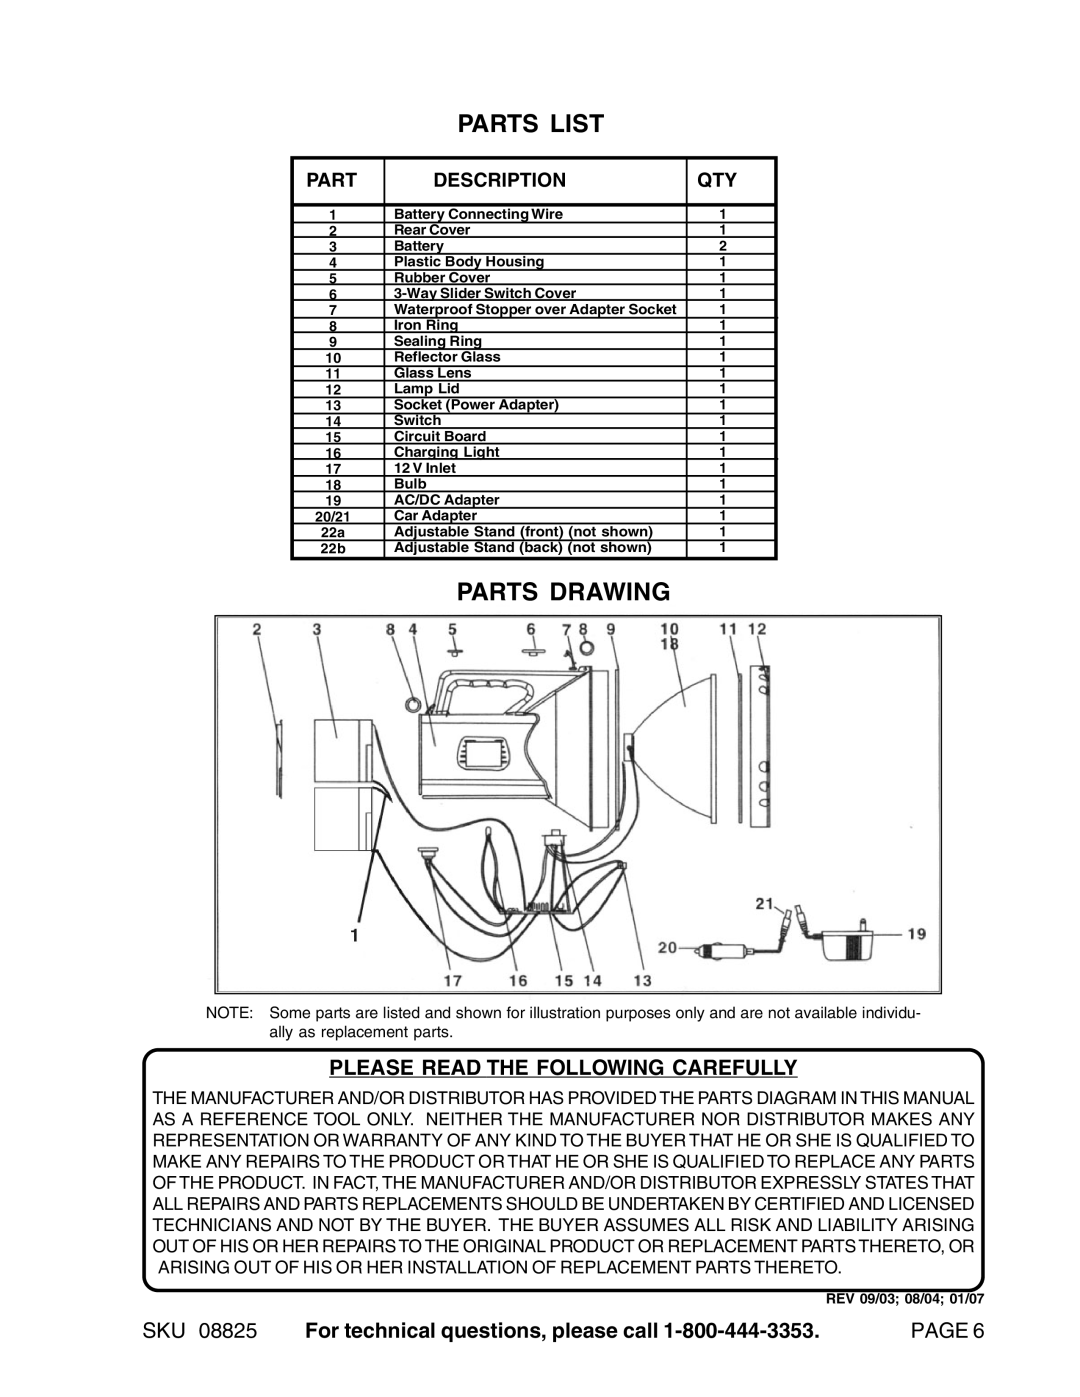 Harbor Freight Tools 08825 manual Please Read The Following Carefully, Parts List, Parts Drawing, Description, Page 